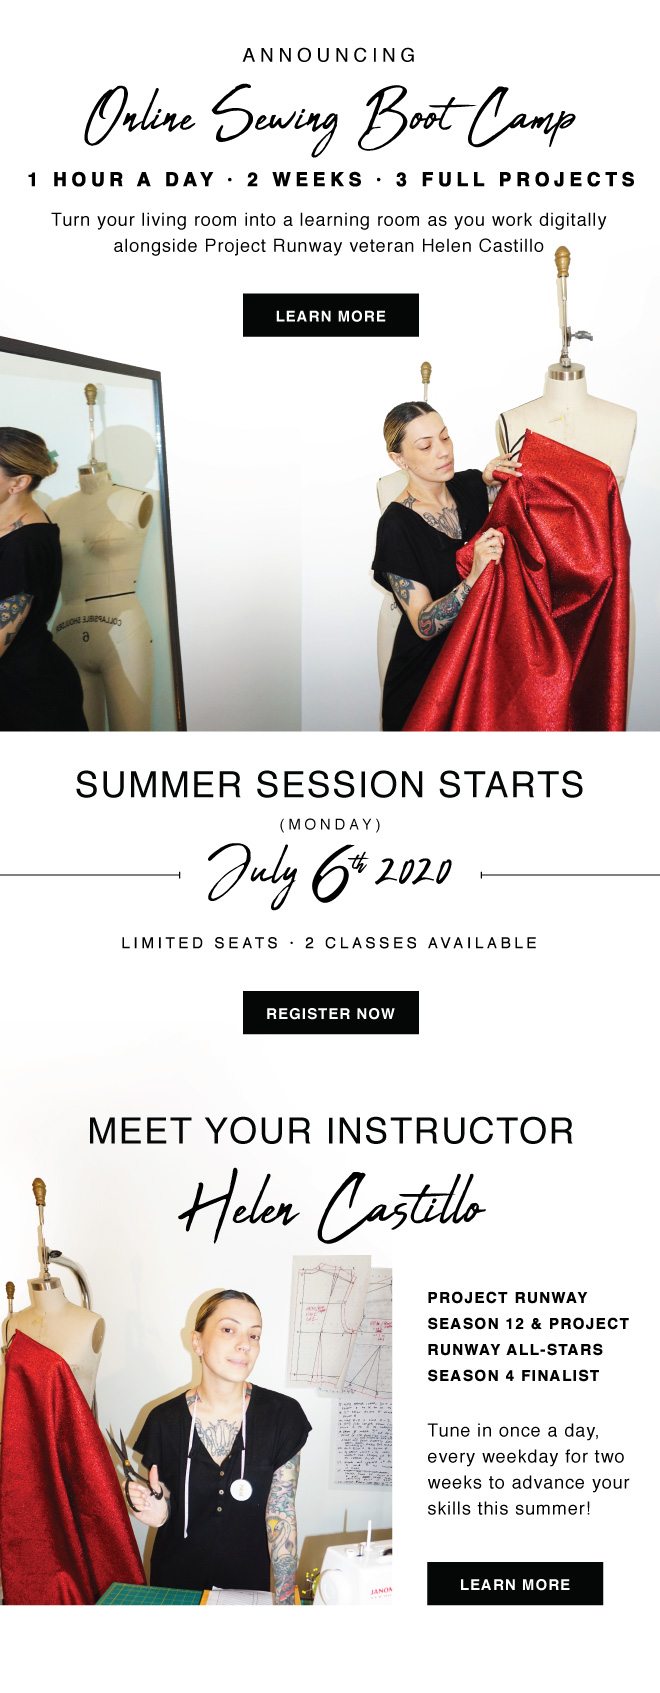 SIGN UP TODAY TO LEARN WITH OUR IN-HOUSE PROJECT RUNWAY SPECIALIST